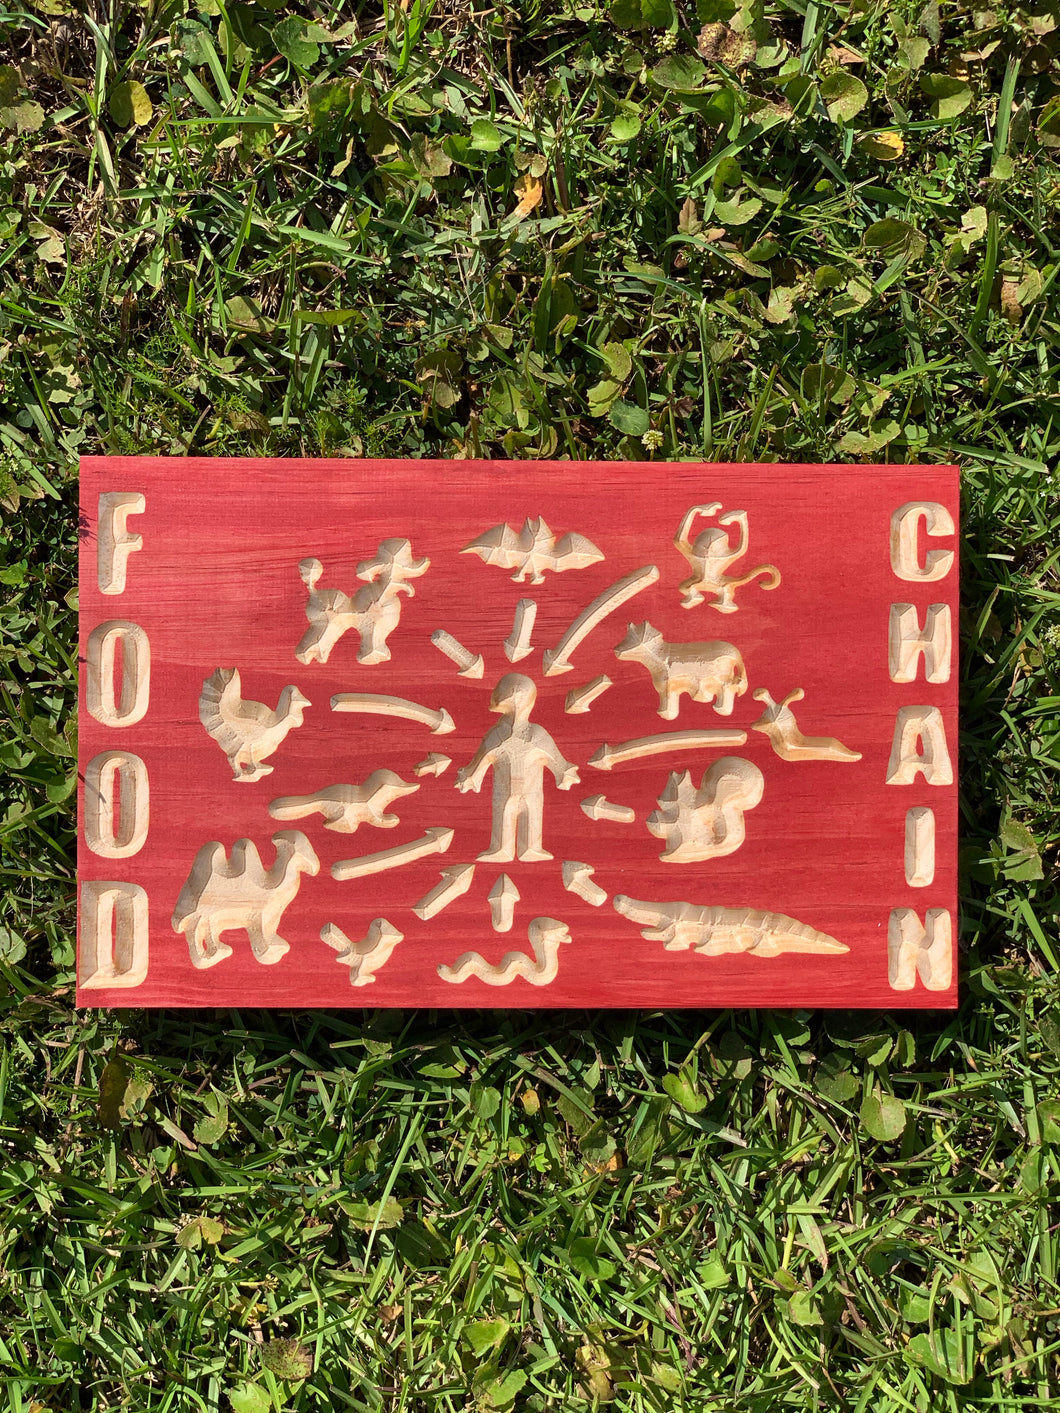 Food Chain sign